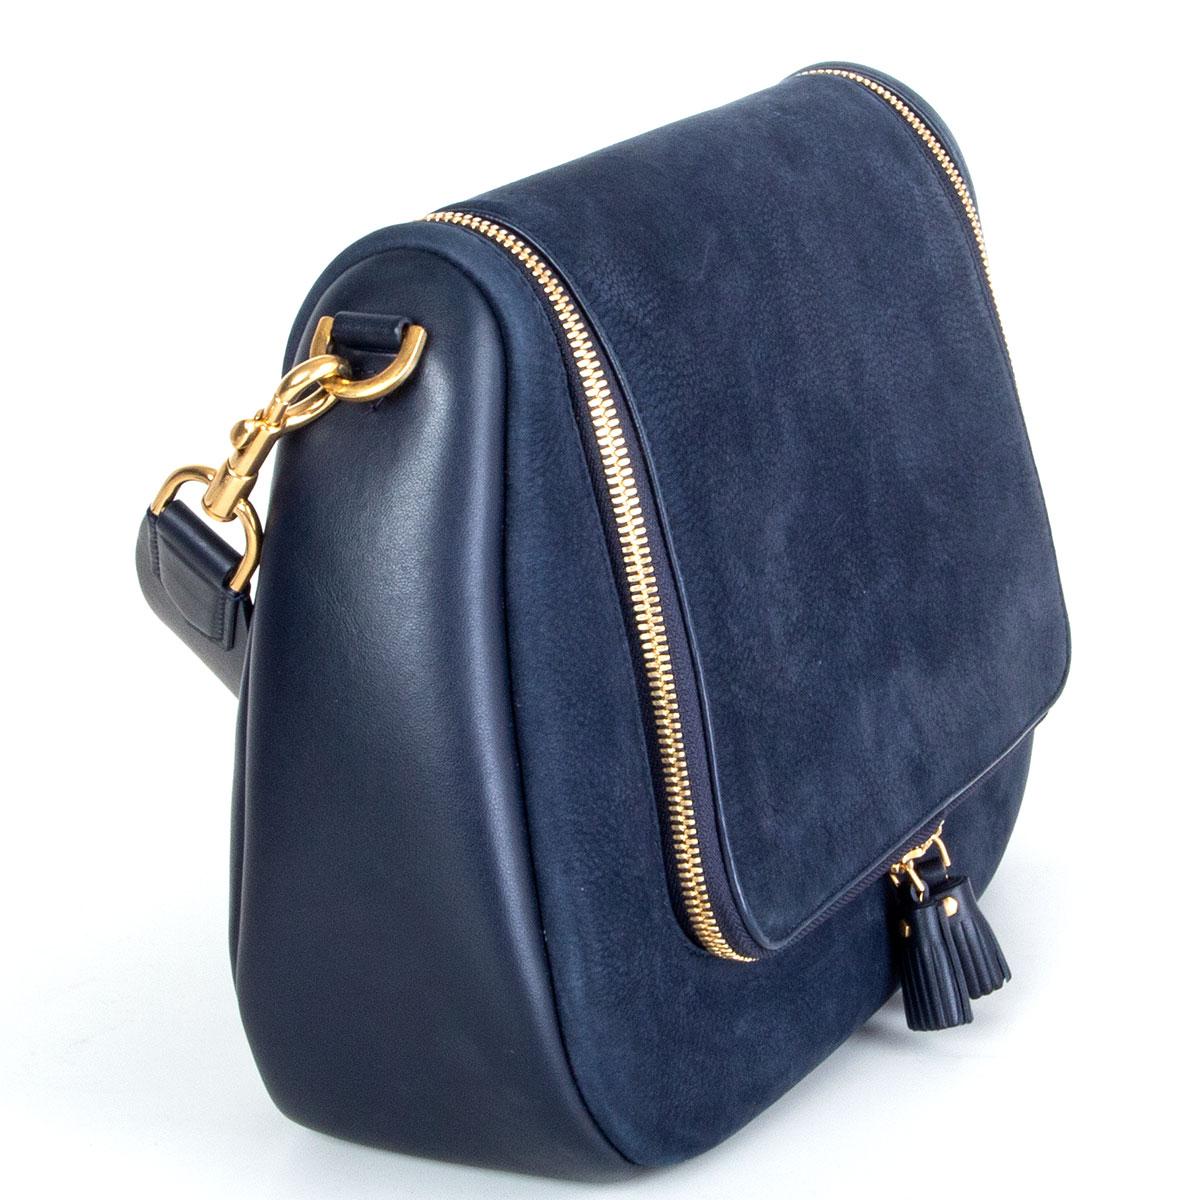 100% authentic Anya Hindmarch 'Maxi Vere Satchel' bag in navy nubuck with a detachable handle and side pannels in calfskin. Opens with a double zipper flap. Lined in petrol calfskin and light taupe suede with one open pocket against the back. Under